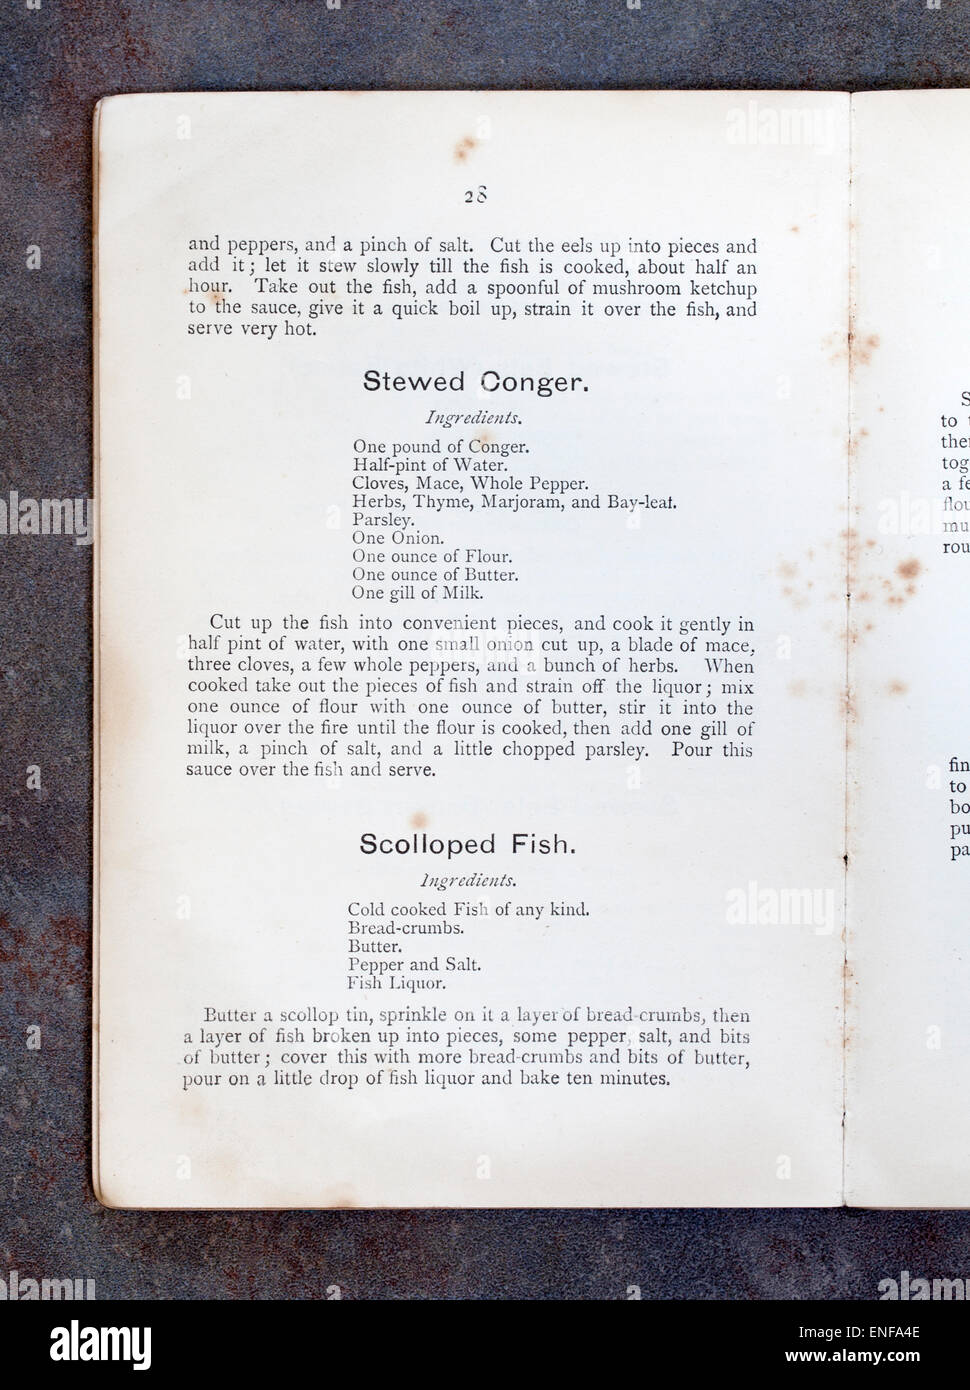 Stewed Conger Scolloped Fish recipes from Plain Cookery Recipes Book by Mrs Charles Clarke for the National Training School Stock Photo